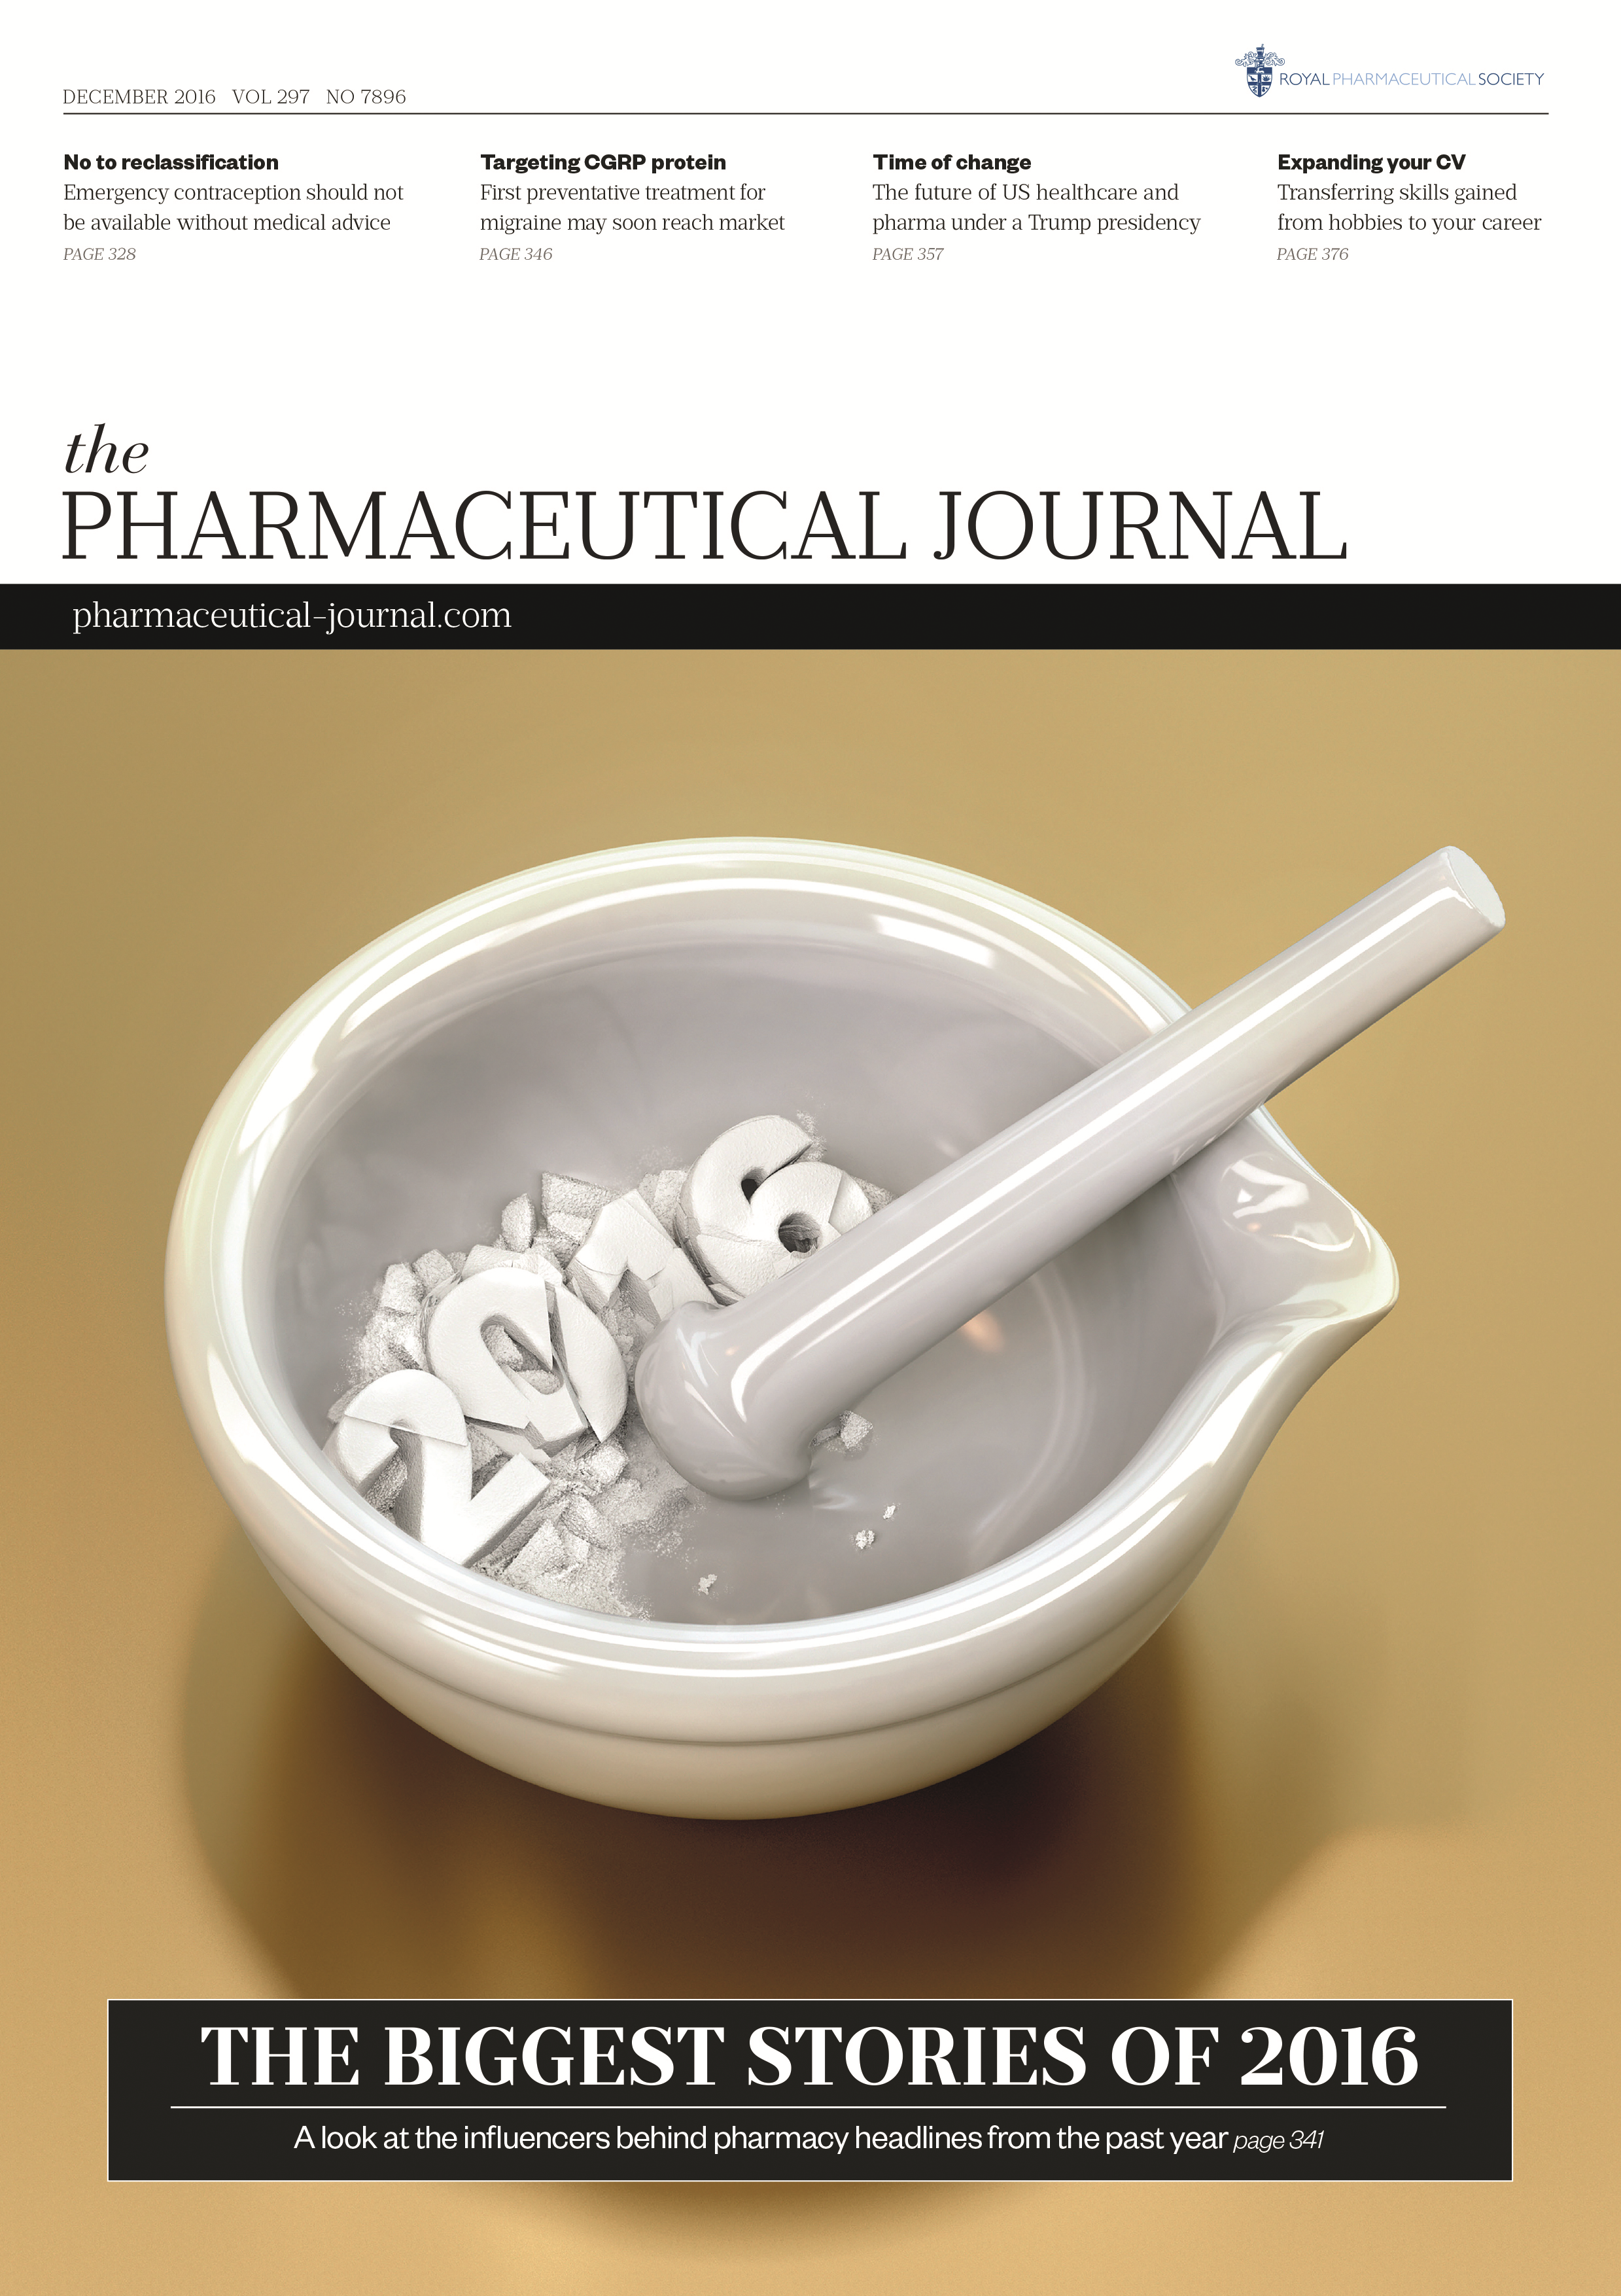 Publication issue cover for PJ, December 2016, Vol 297, No 7896